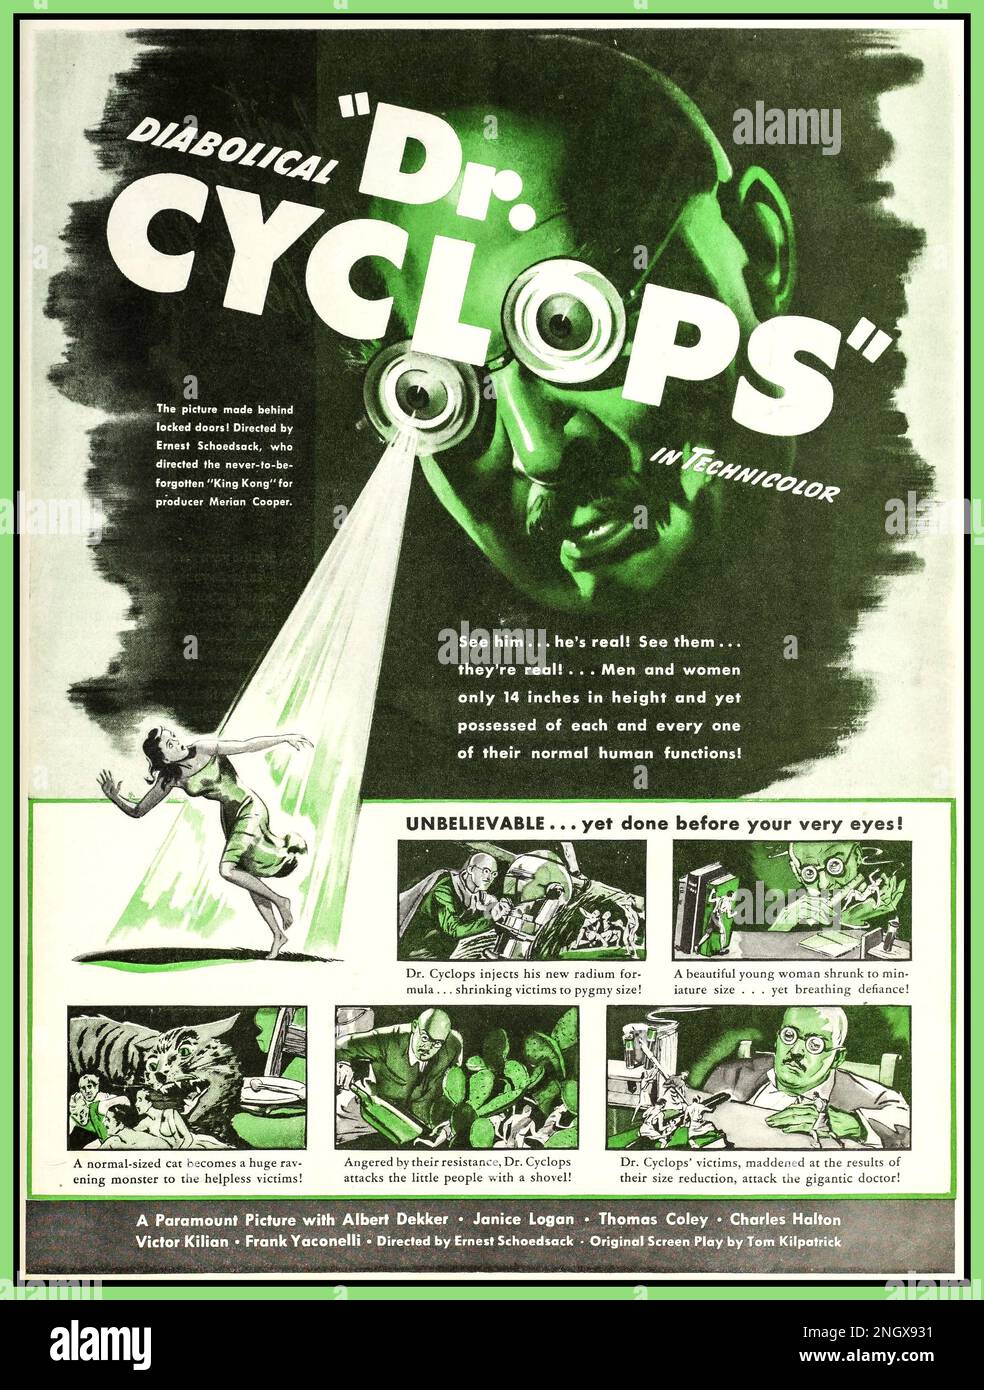 Vintage 1940s horror movie film DR CYCLOPS, a 1940 American science fiction horror film from Paramount Pictures, produced by Dale Van Every and Merian C. Cooper, directed by Ernest B. Schoedsack, and starring Thomas Coley, Victor Kilian, Janice Logan, Charles Halton, Frank Yaconelli, and Albert Dekker. The film was nominated for an Oscar for Best Visual Effects (by Farciot Edouart and Gordon Jennings) at the 13th Academy Awards. Stock Photo